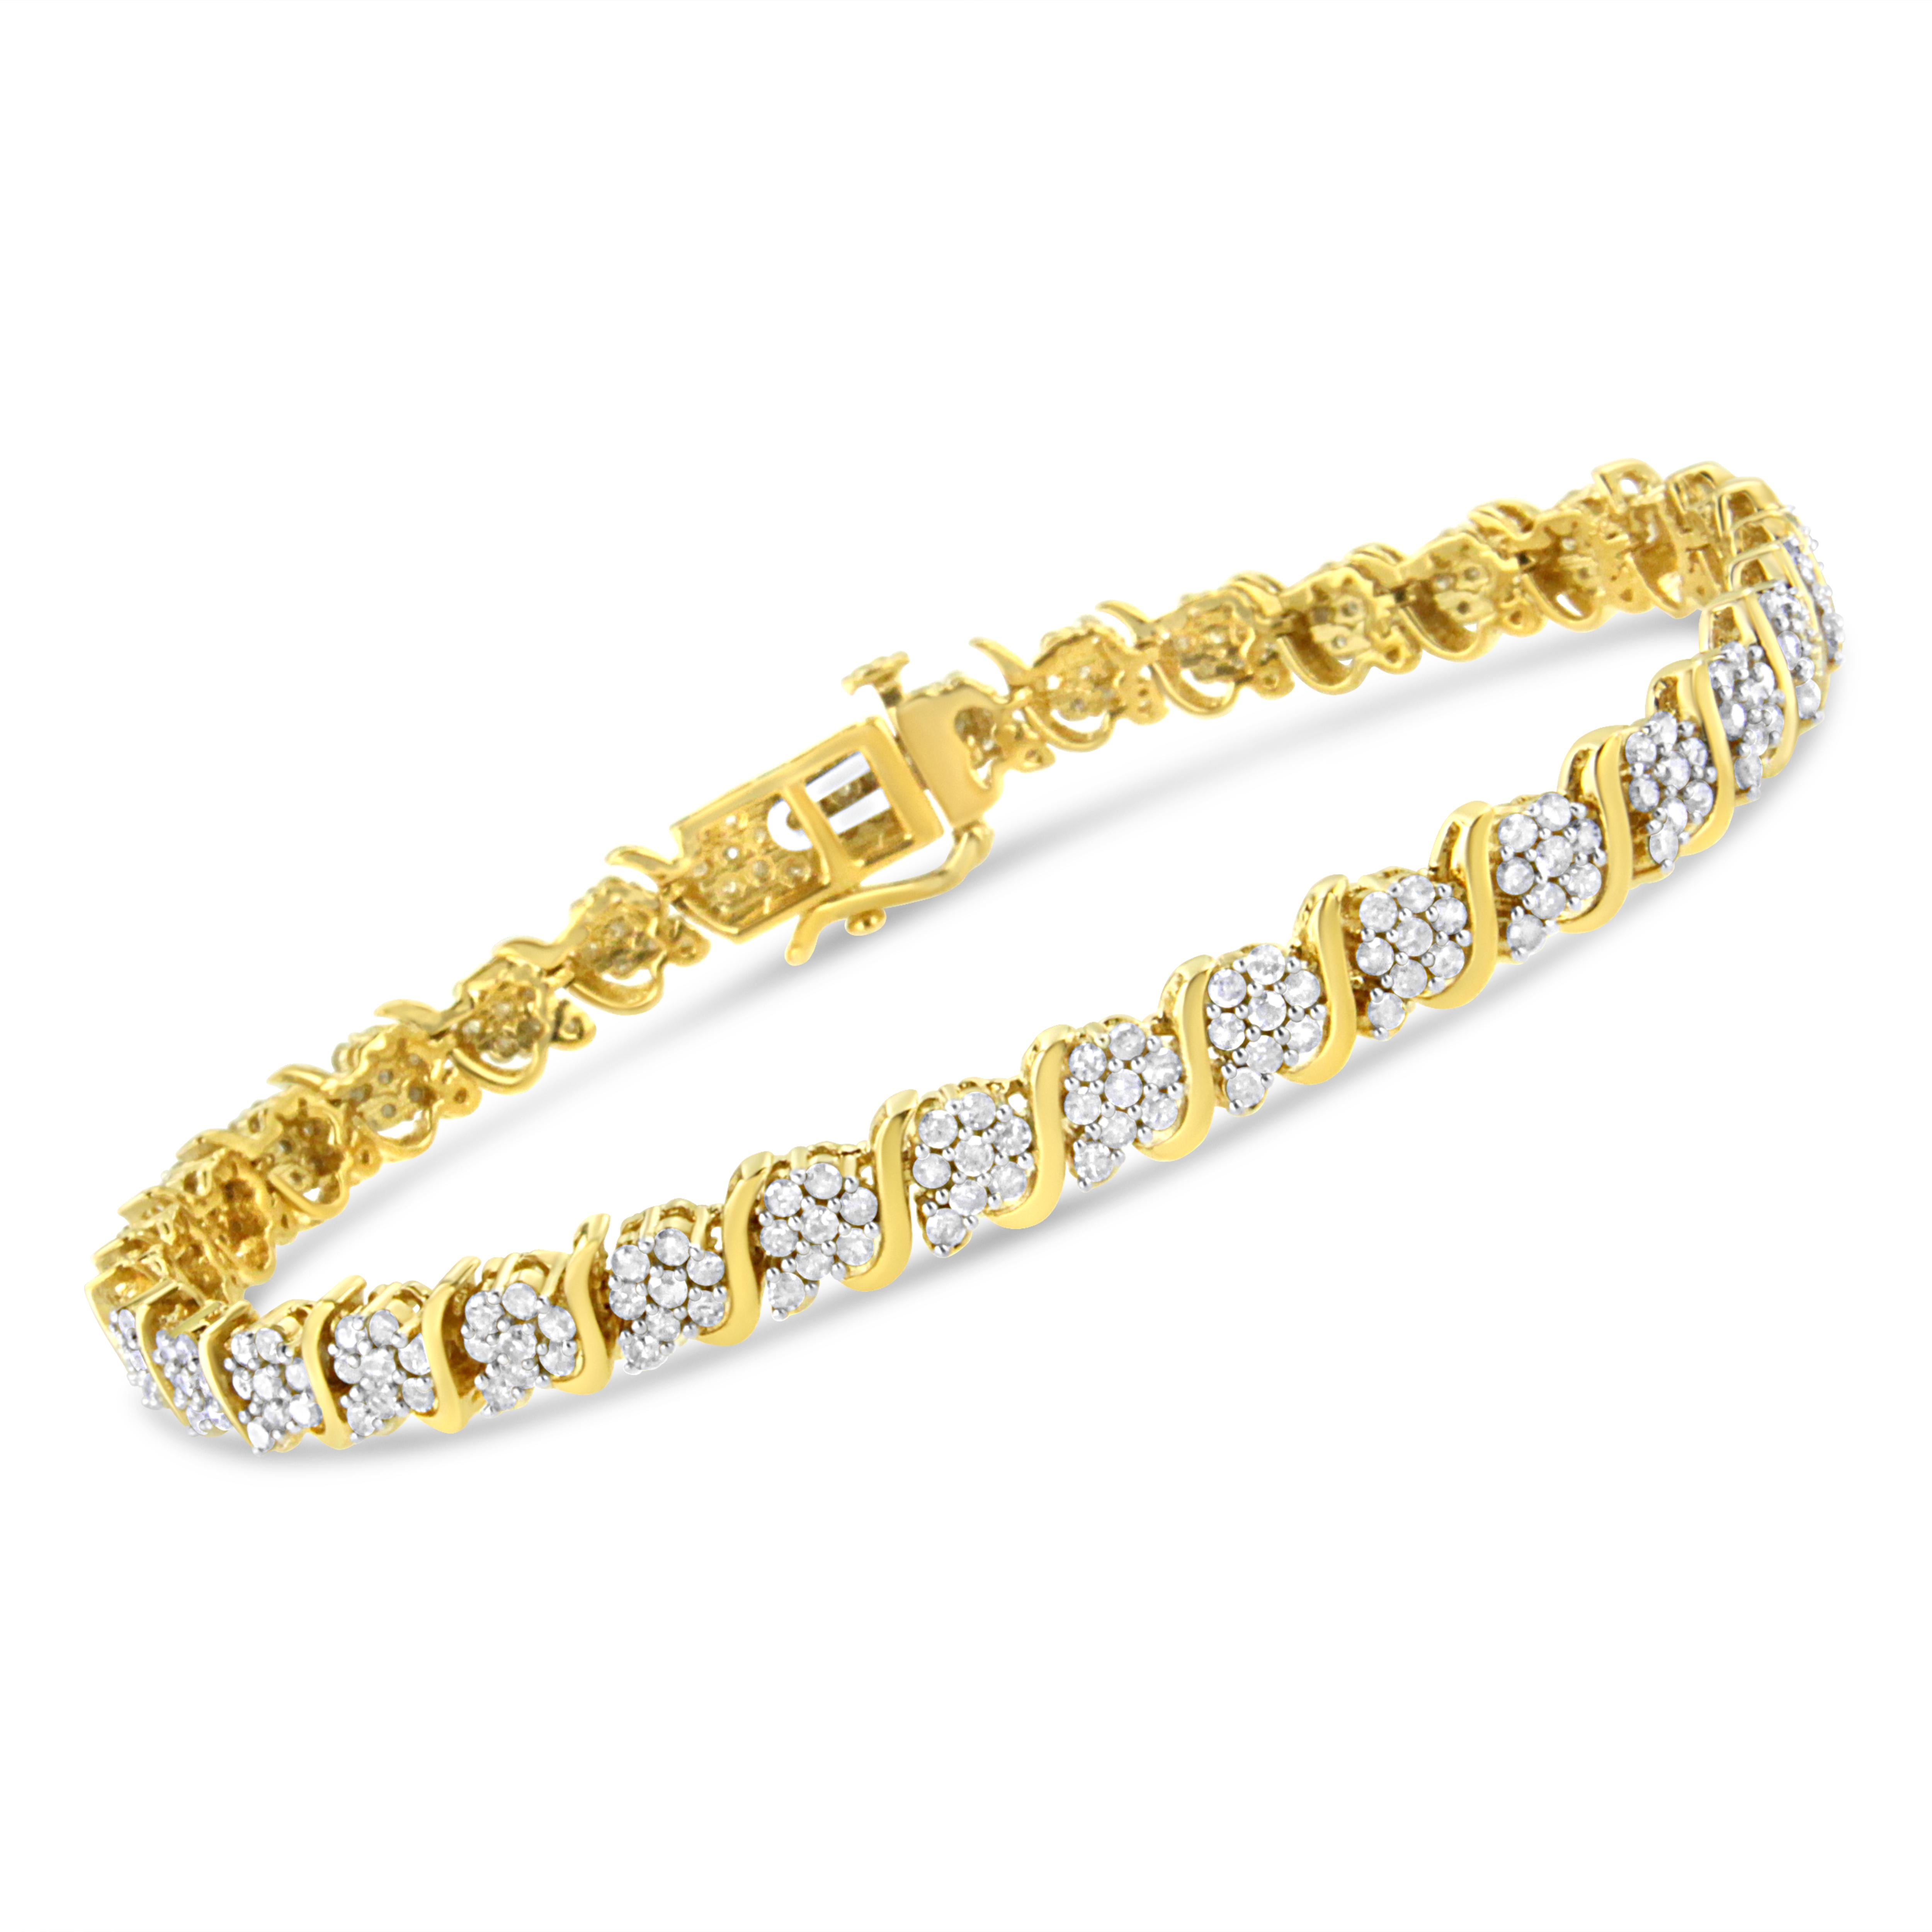 You will love the design of this elegant 14k yellow gold plated .925 sterling silver bracelet. Gold 